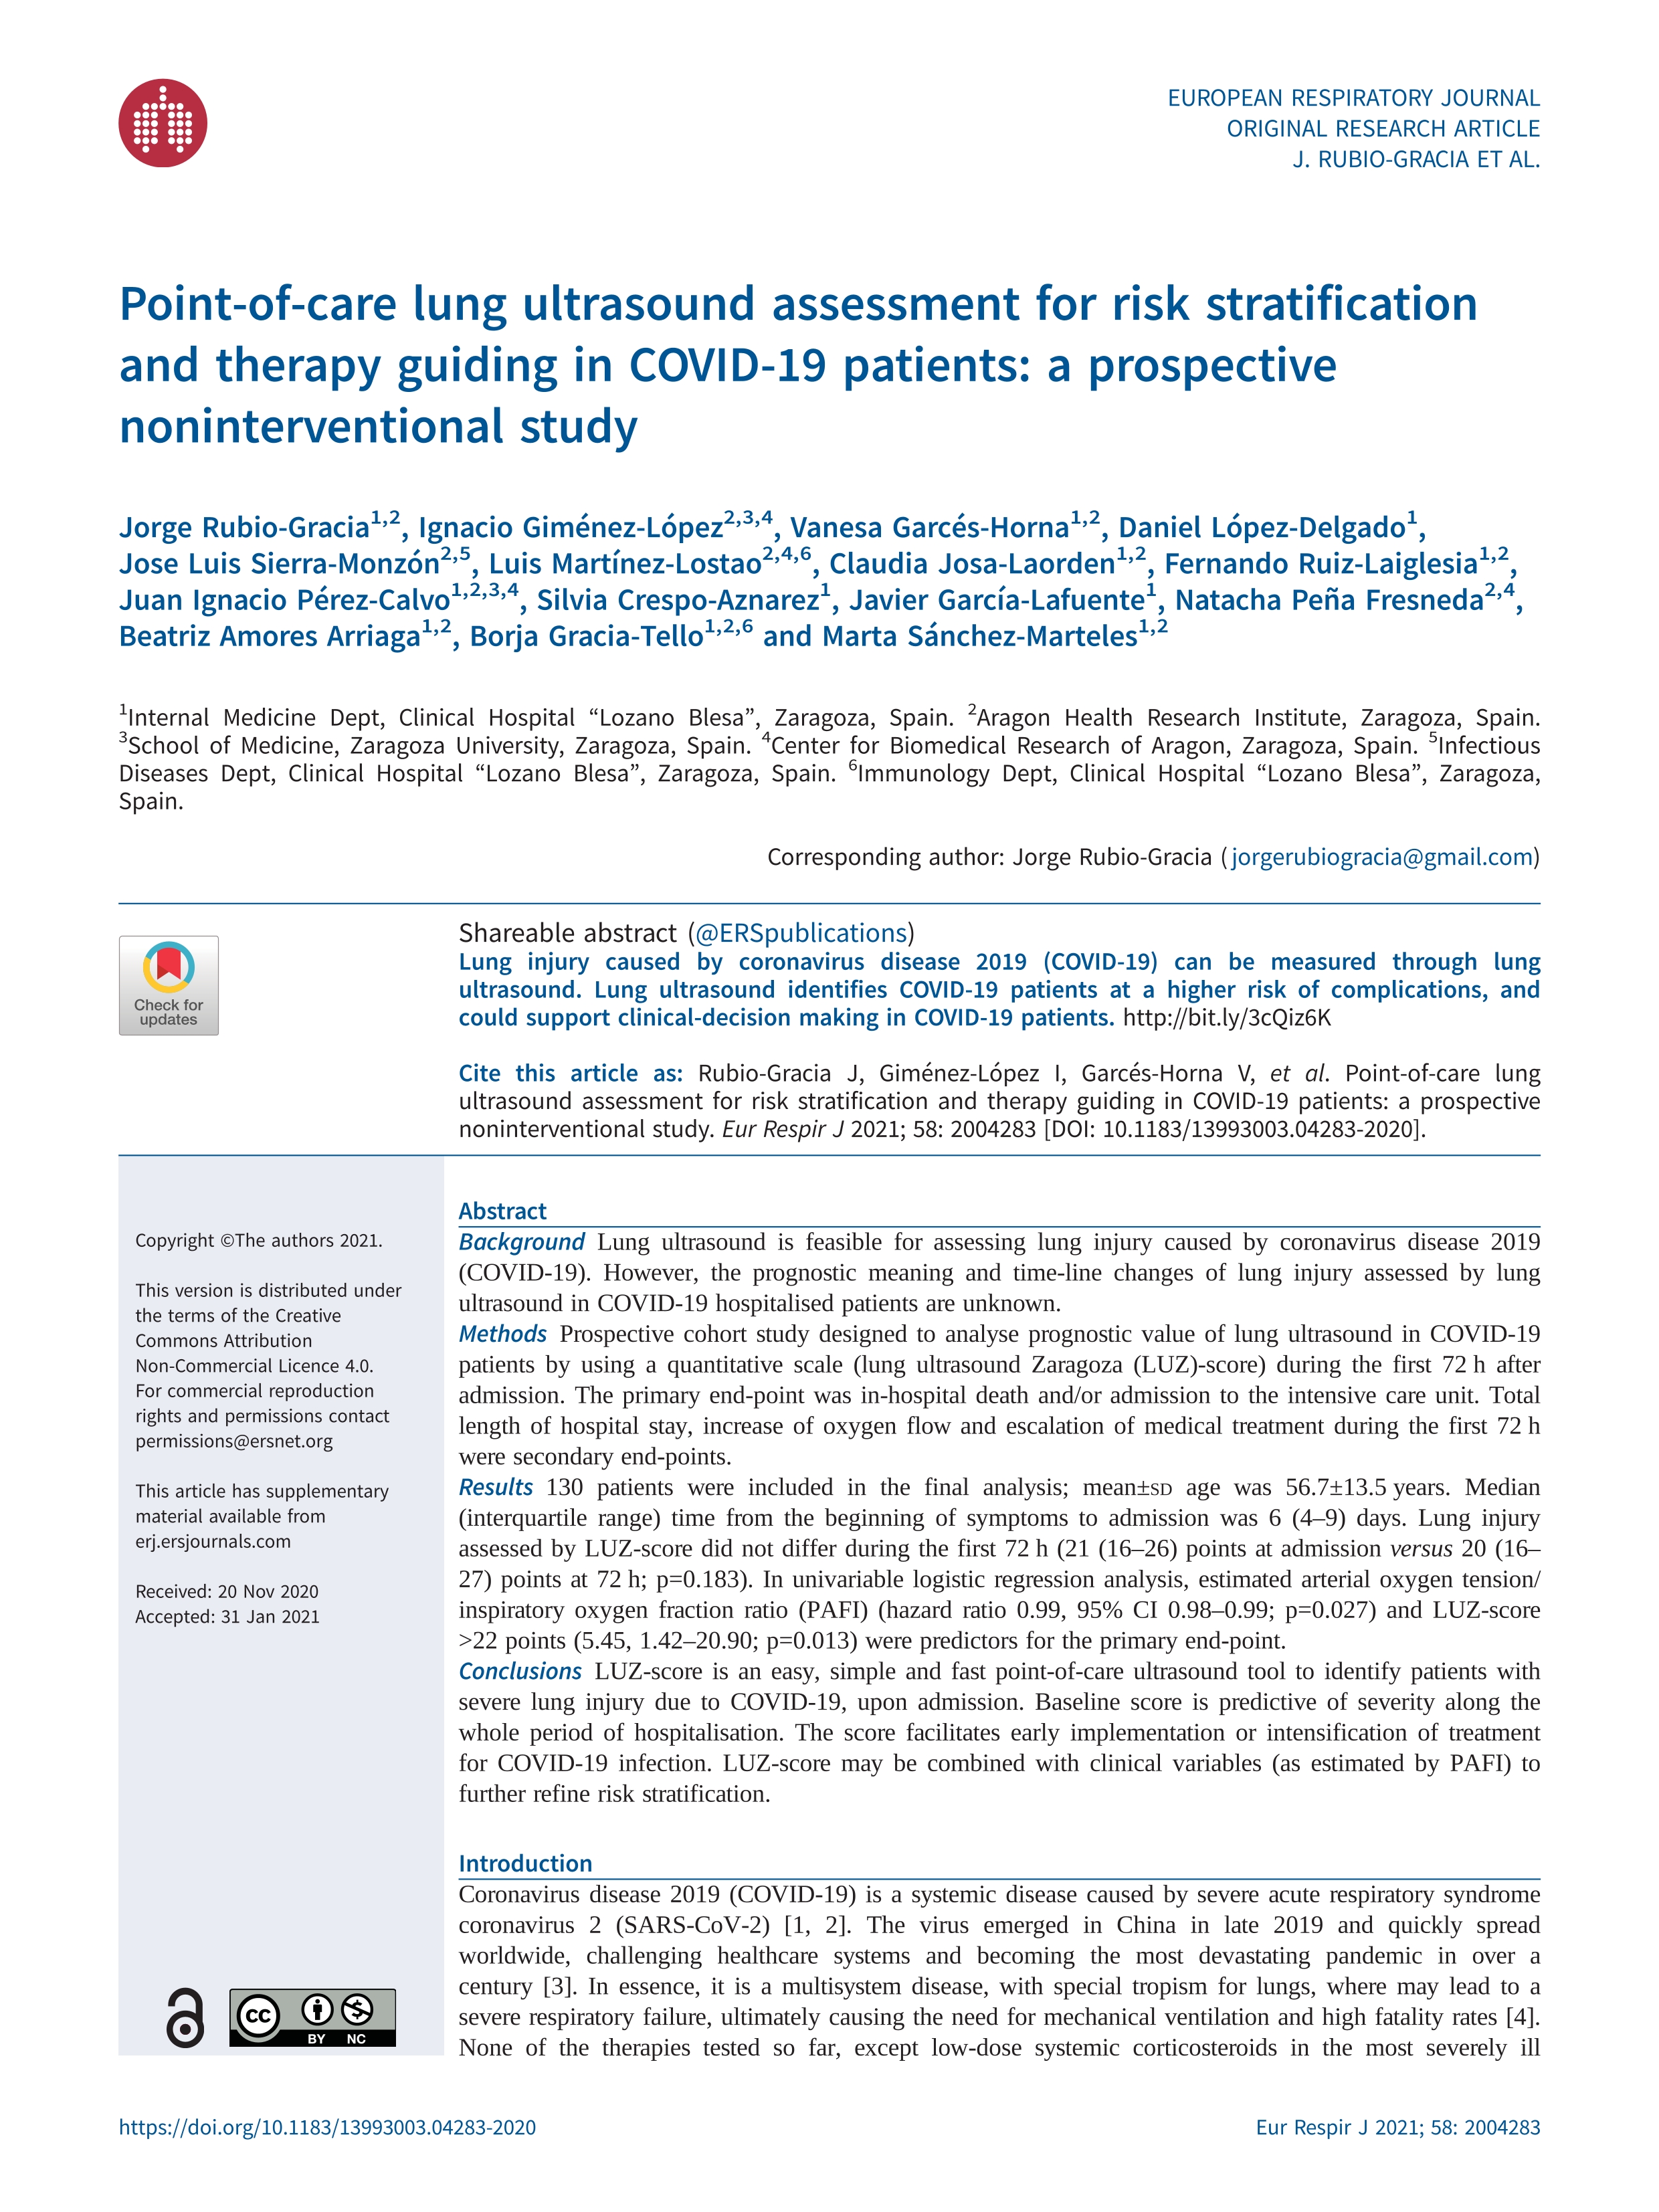 Point-of-care lung ultrasound assessment for risk stratification and therapy guiding in COVID-19 patients. A prospective non-interventional study.